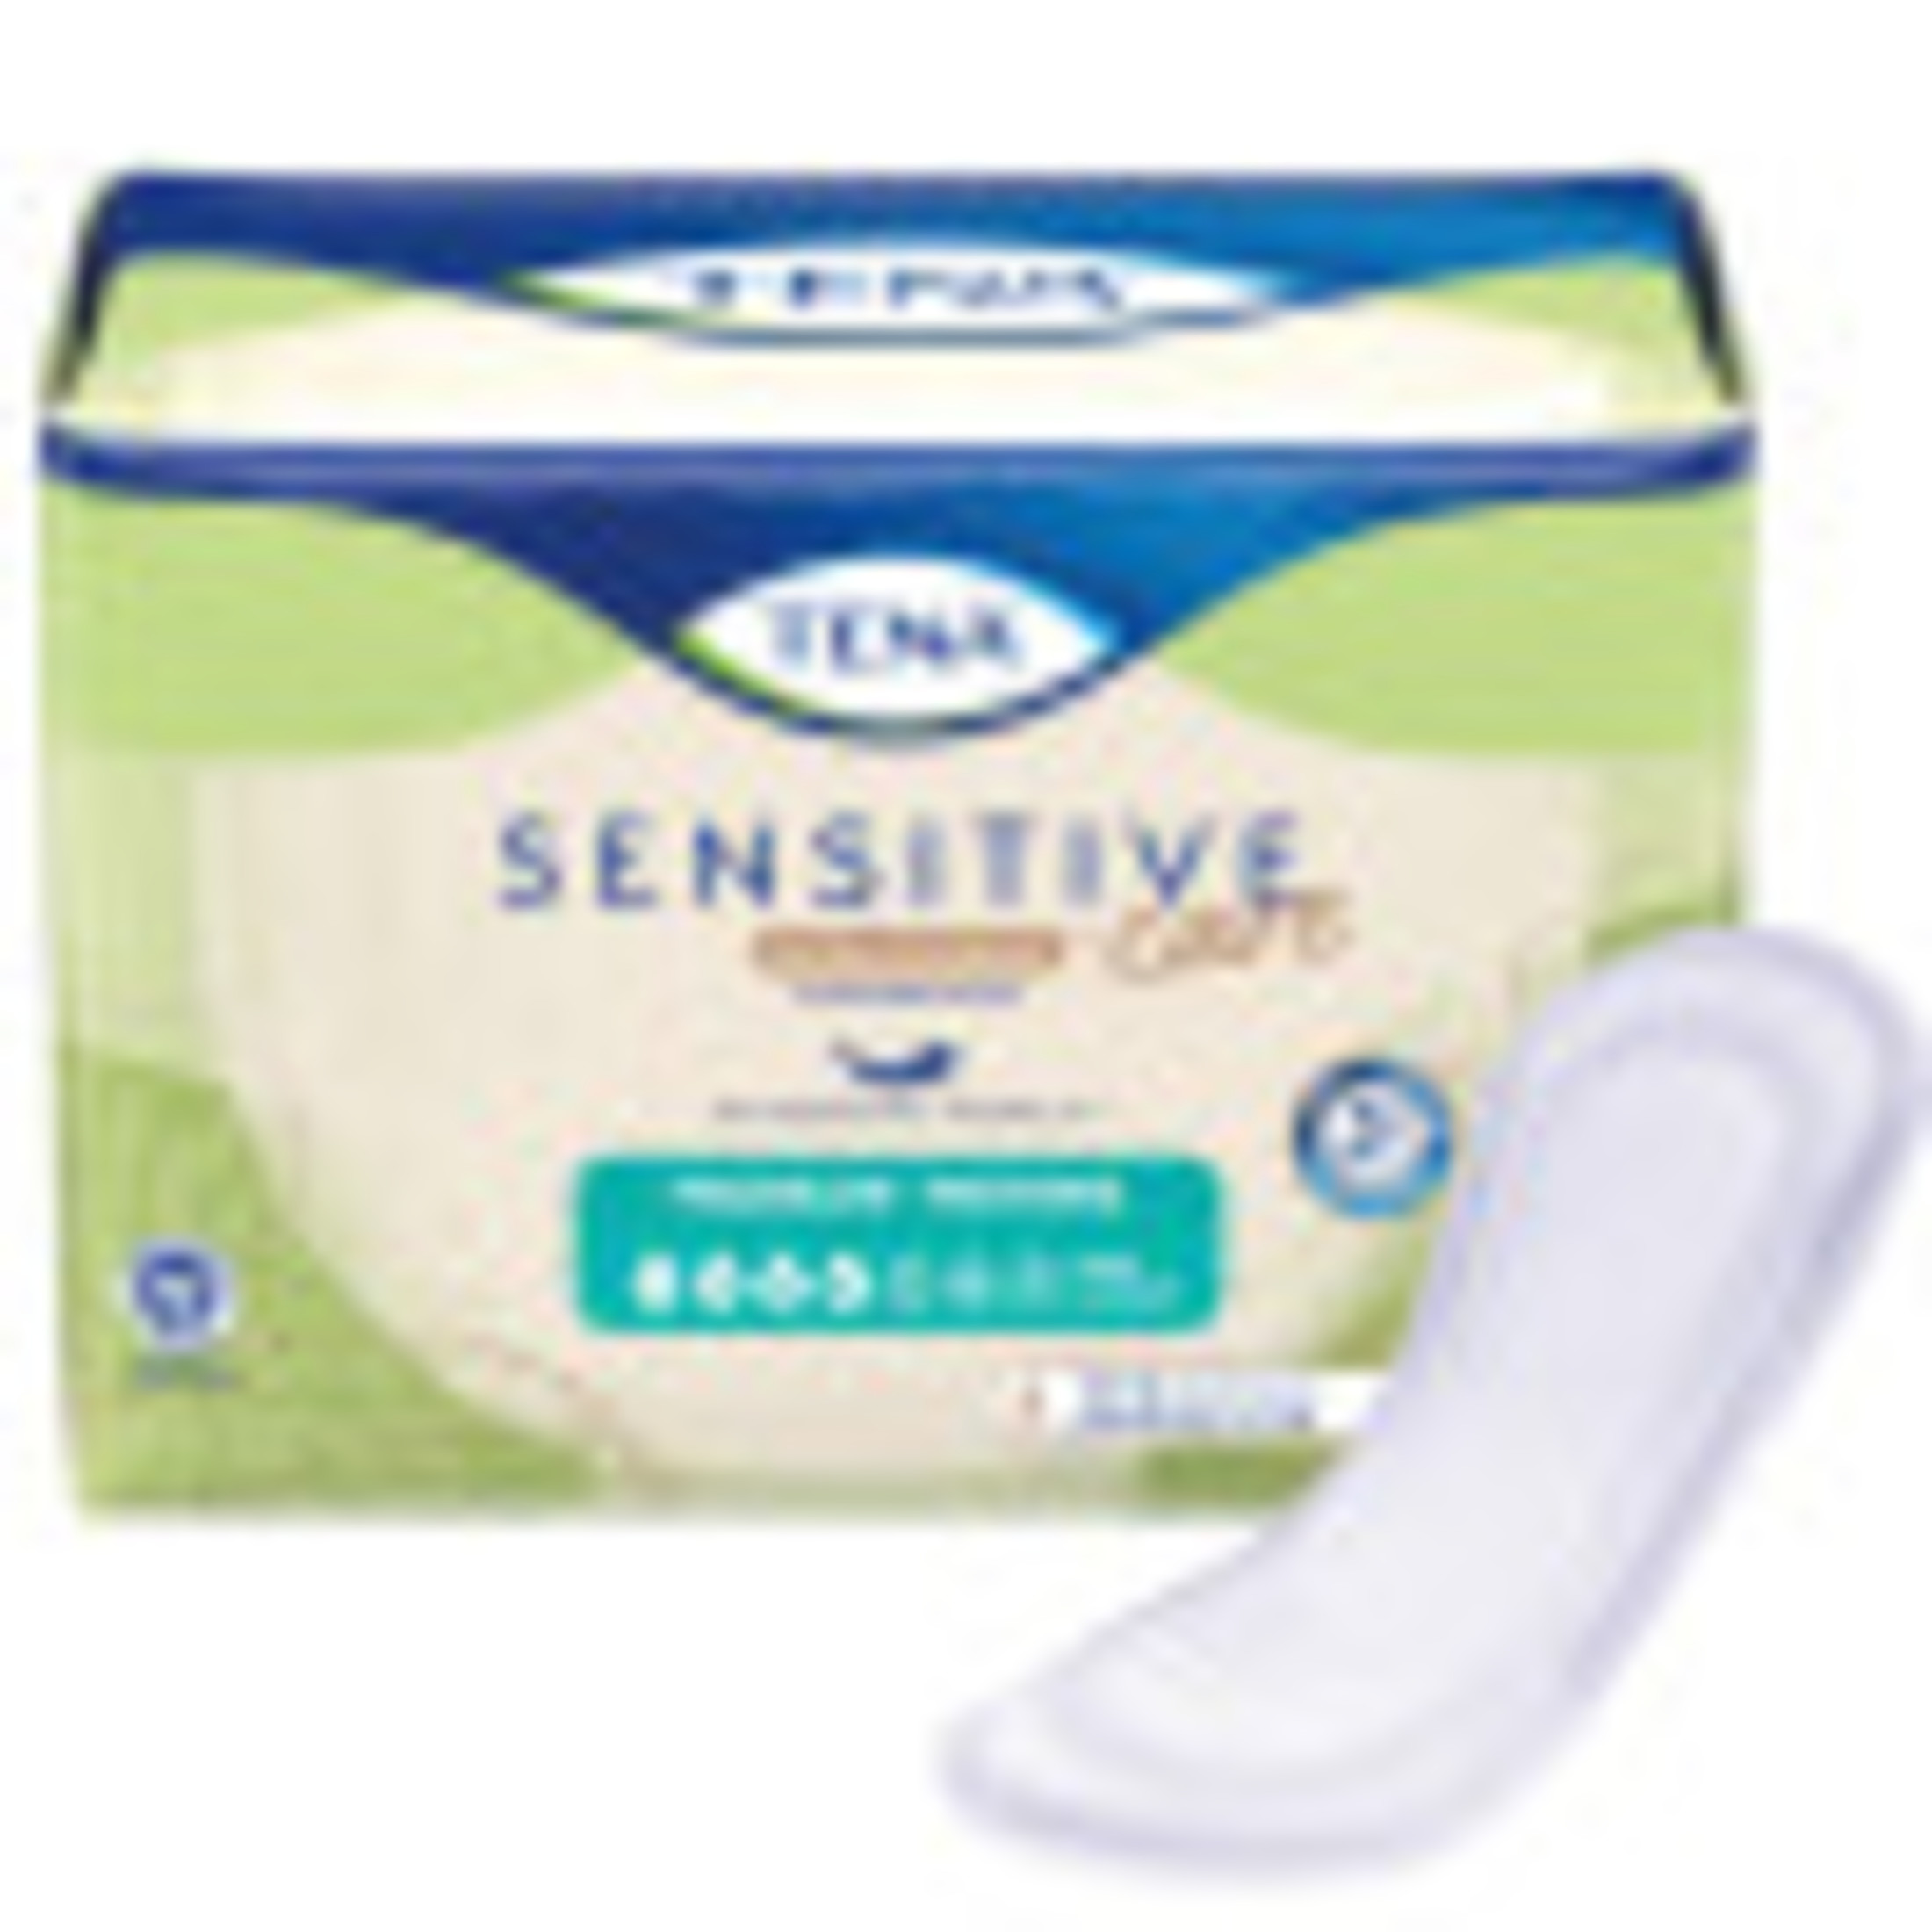 Tena Sensitive Care Extra Coverage Moderate Absorbency Incontinence Pad, 60ct - image 2 of 7